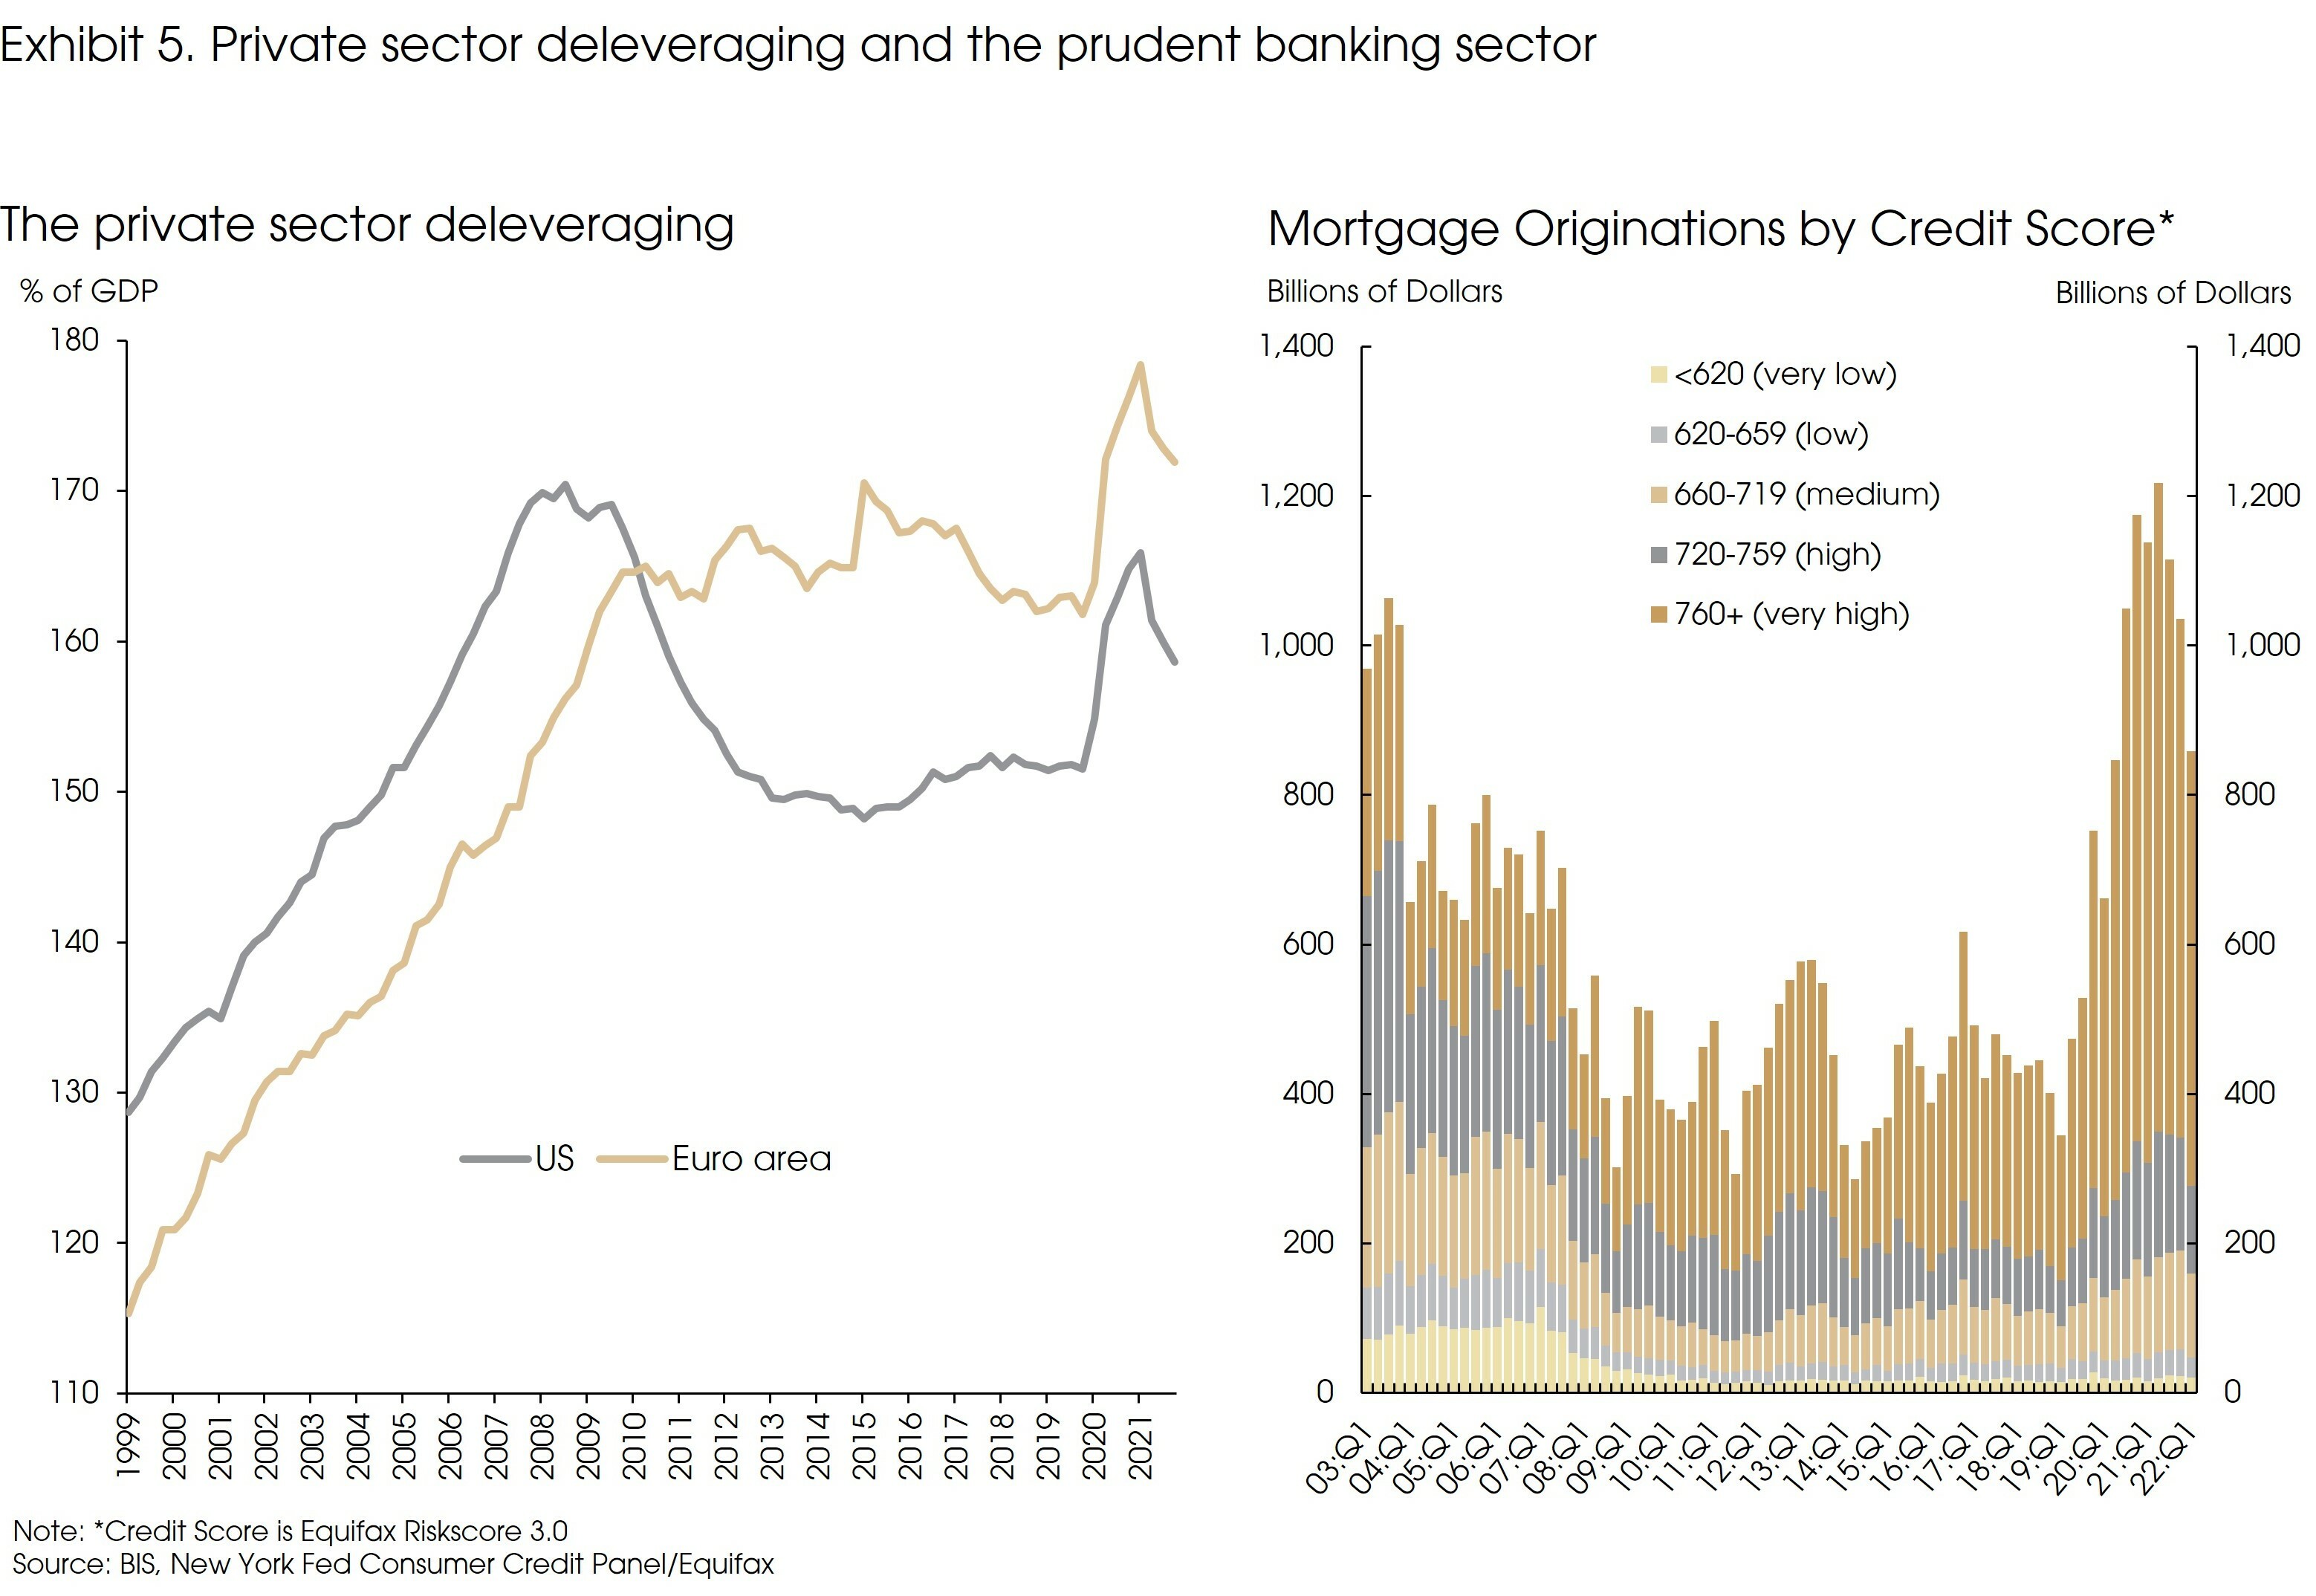 Exhibit 5 Private Sector Deleveraging and the Prudent Banking Sector